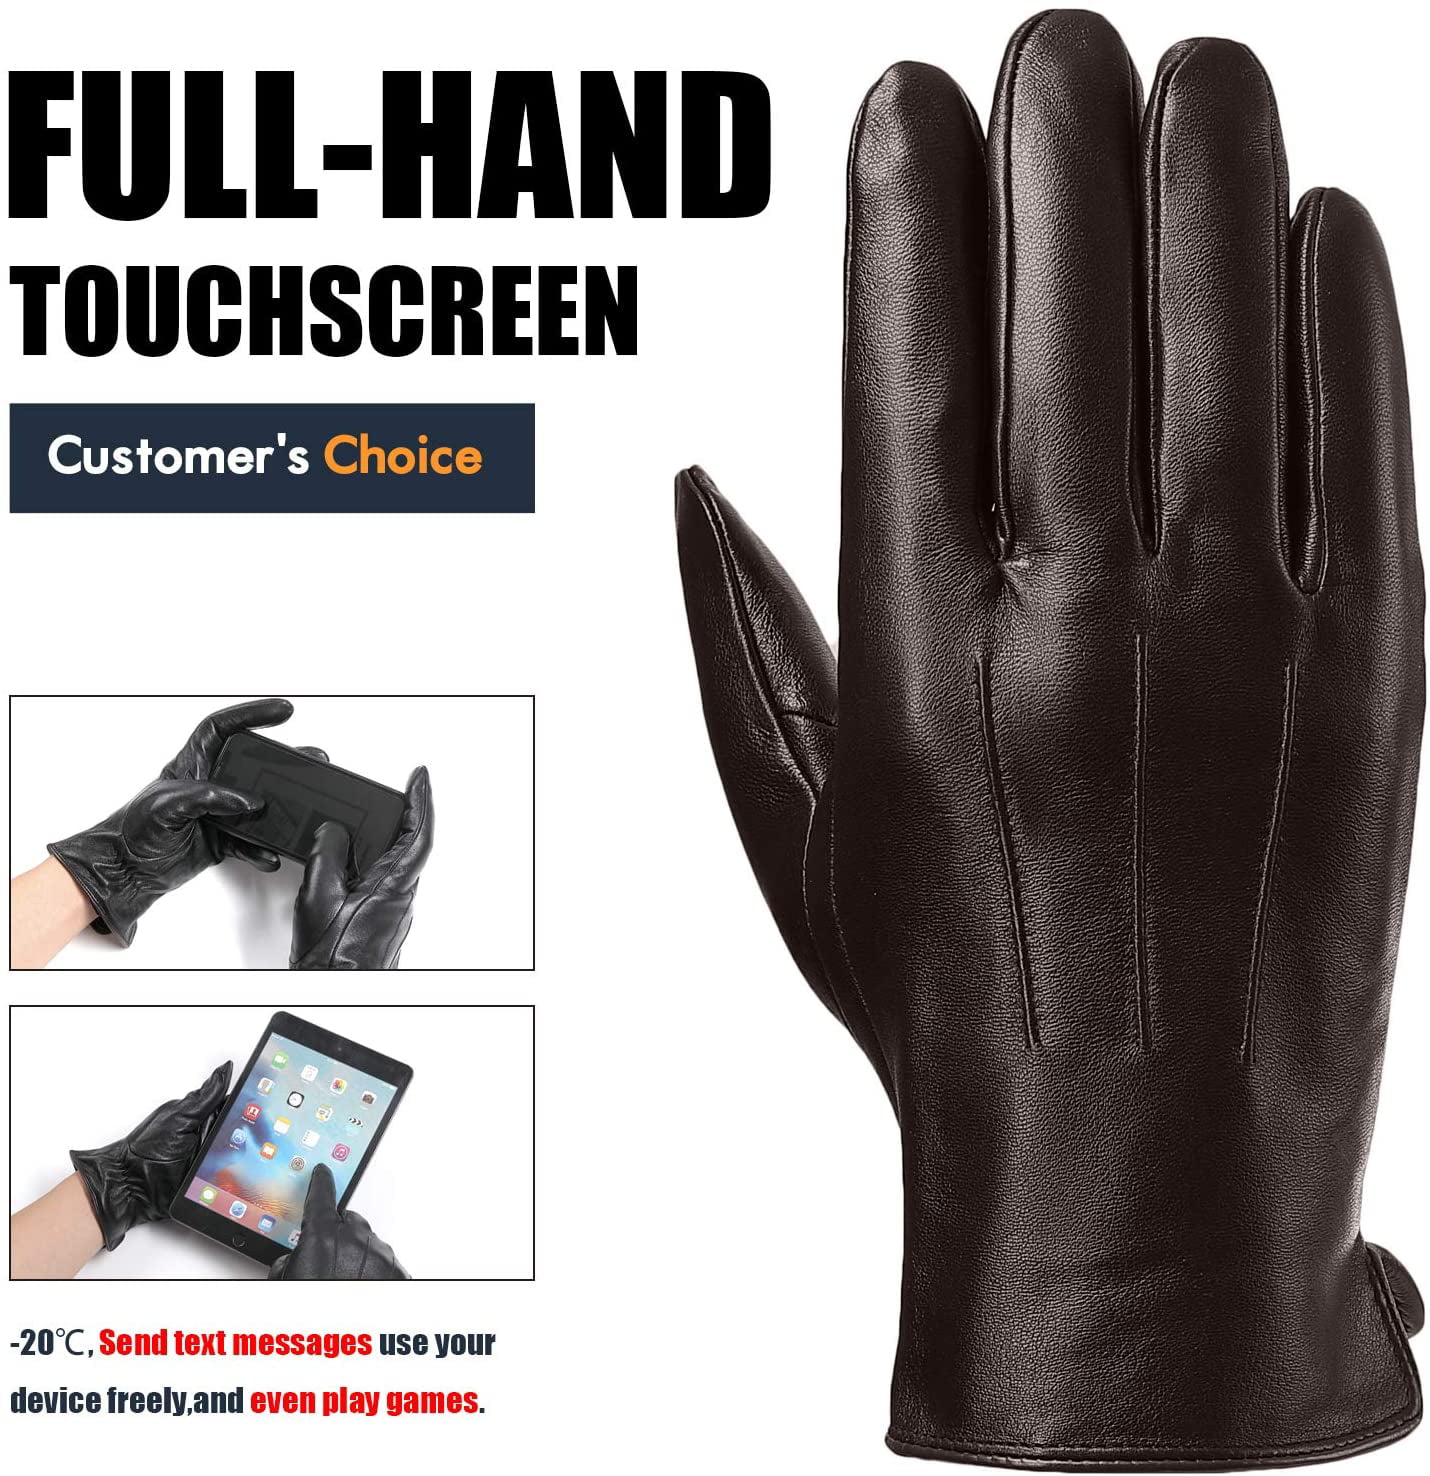 Mens Italian Nappa Winter Touchscreen Leather Gloves Texting Driving Gloves with soft nap cuffs for Men 